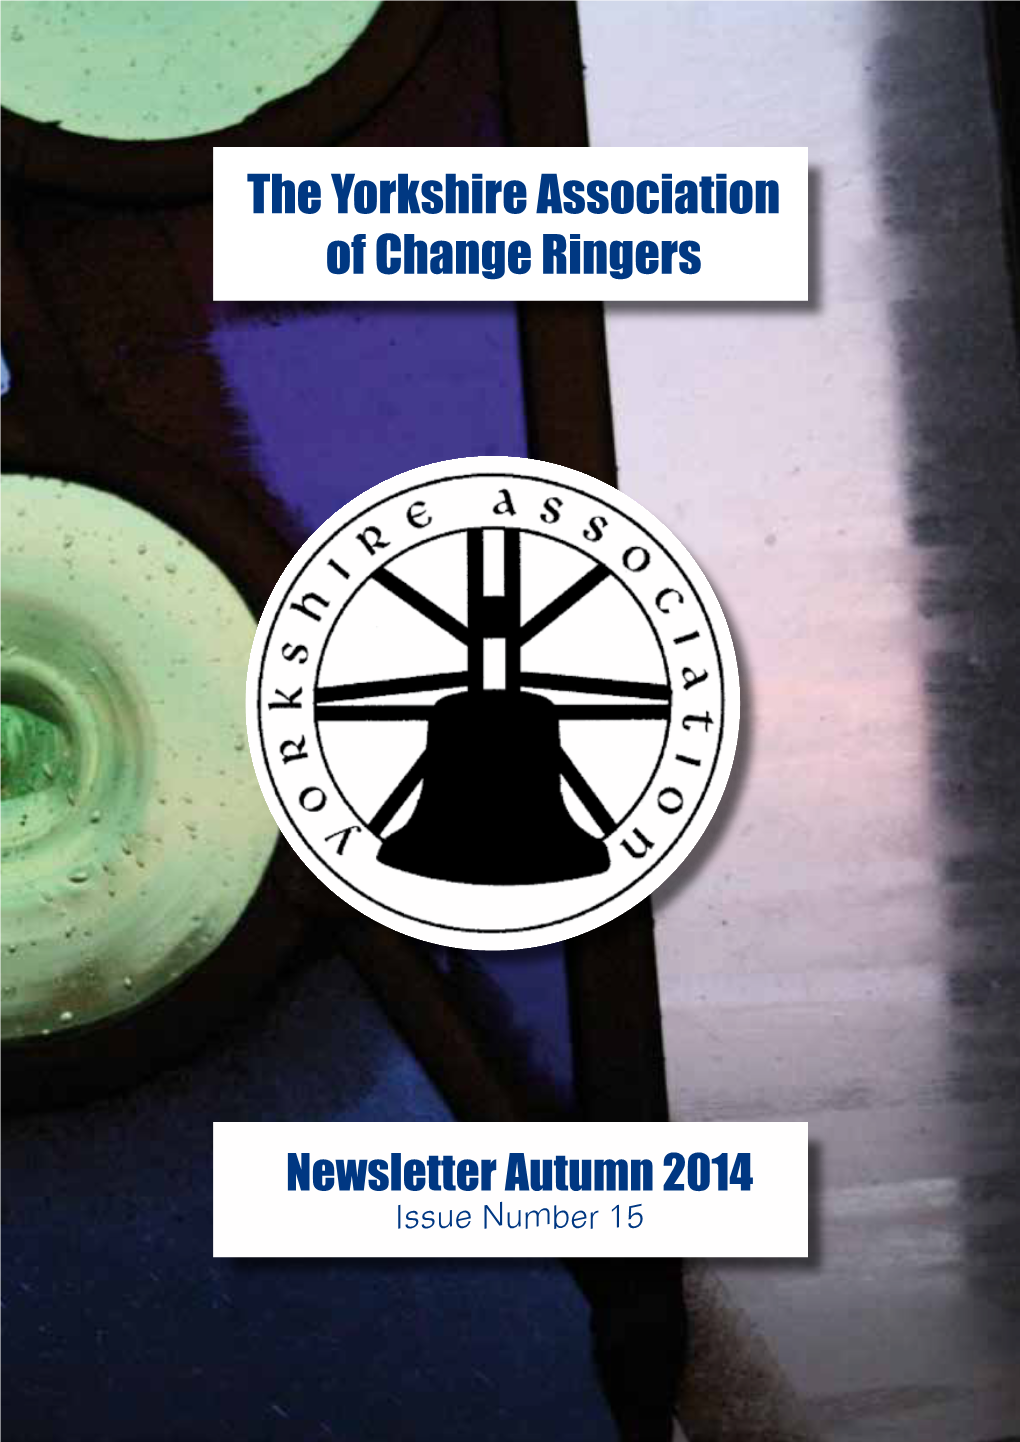 The Yorkshire Association of Change Ringers